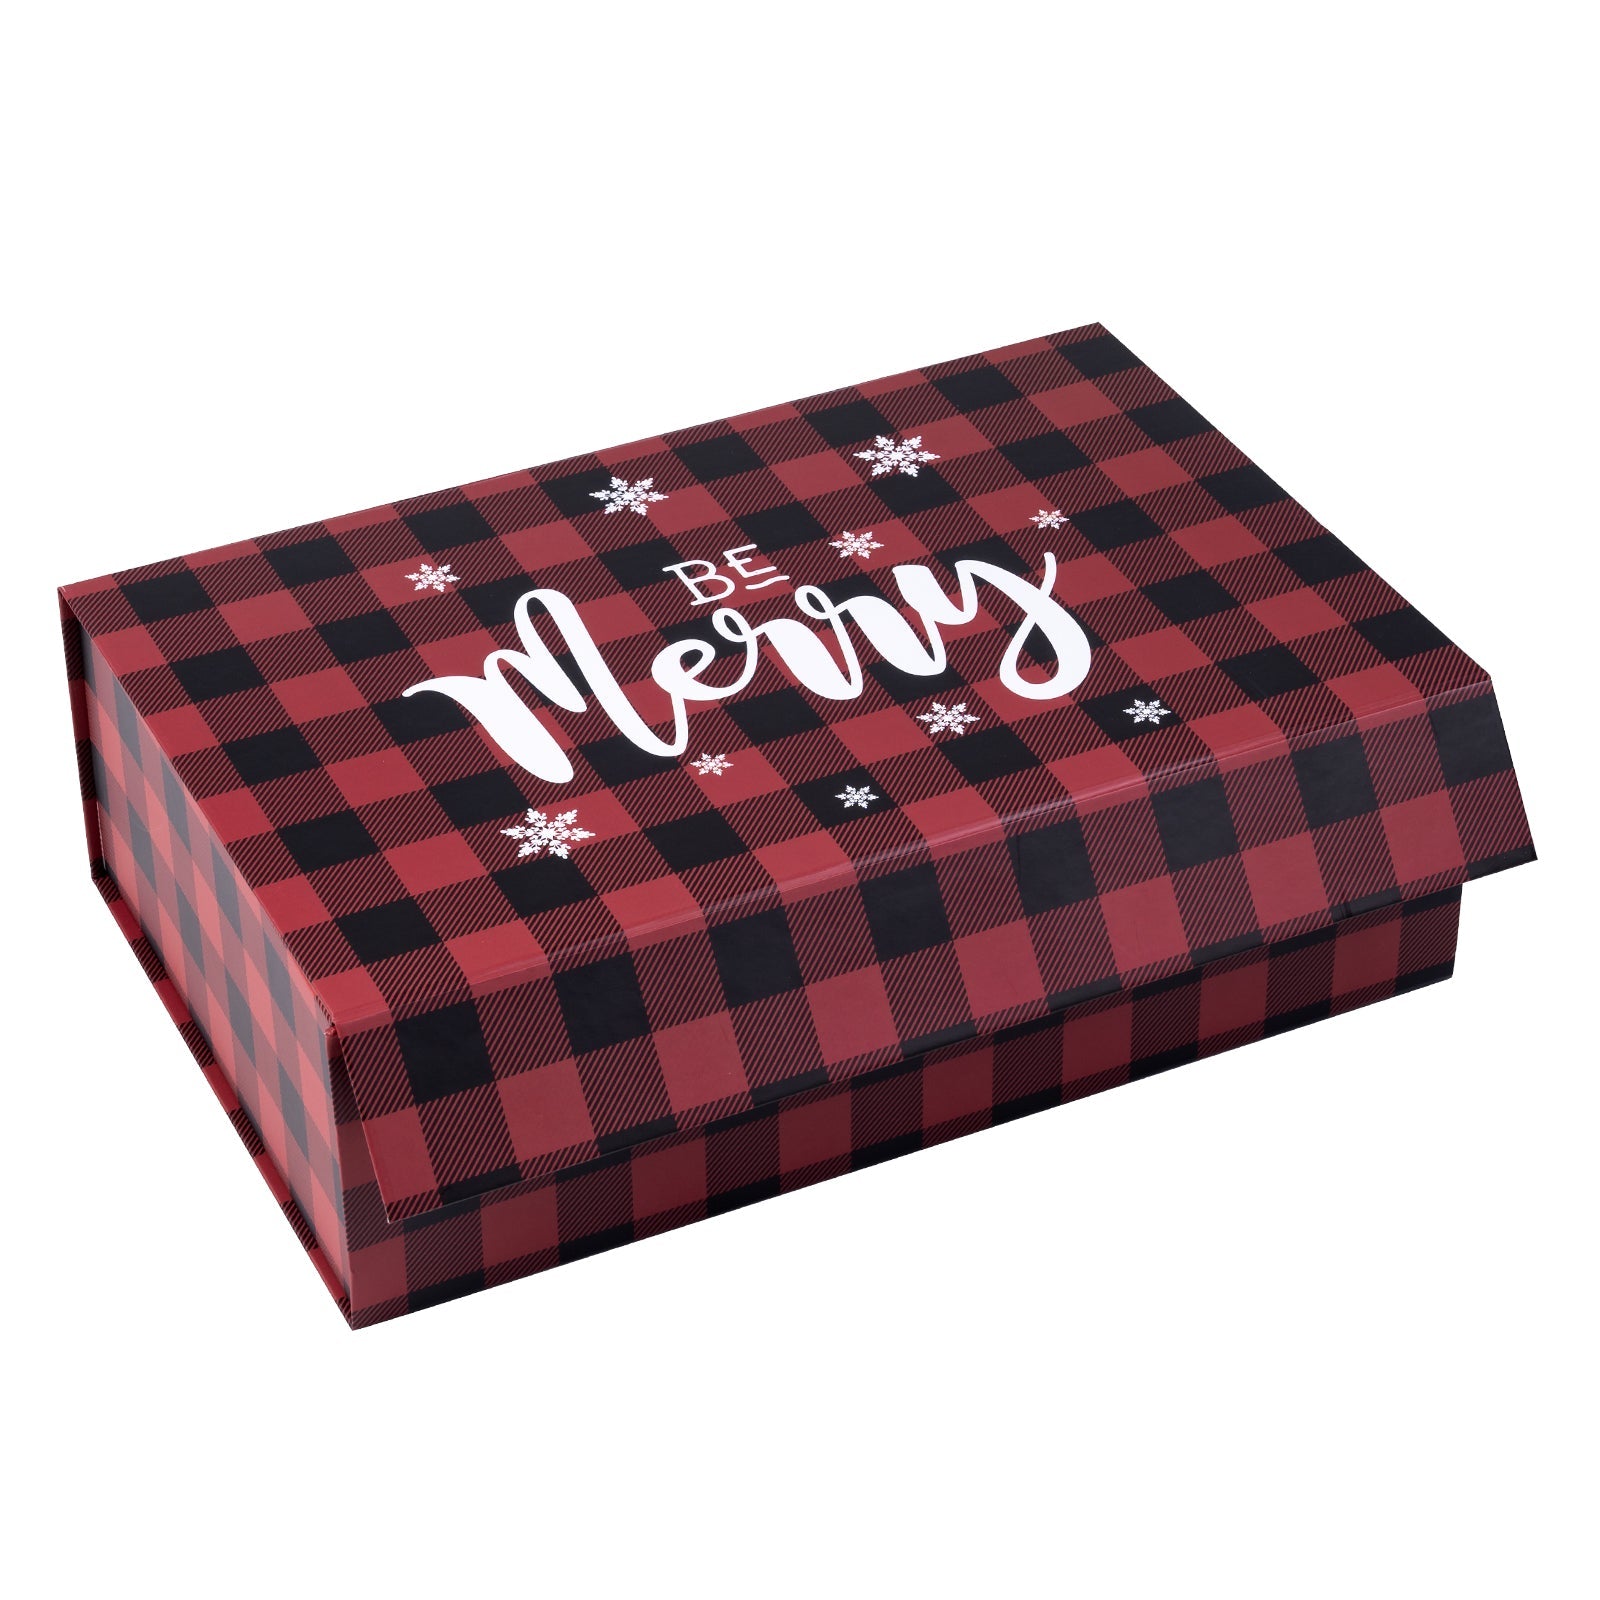 14x9x4.3 inch Collapsible Gift Box with Magnetic Closure - Buffalo Plaid